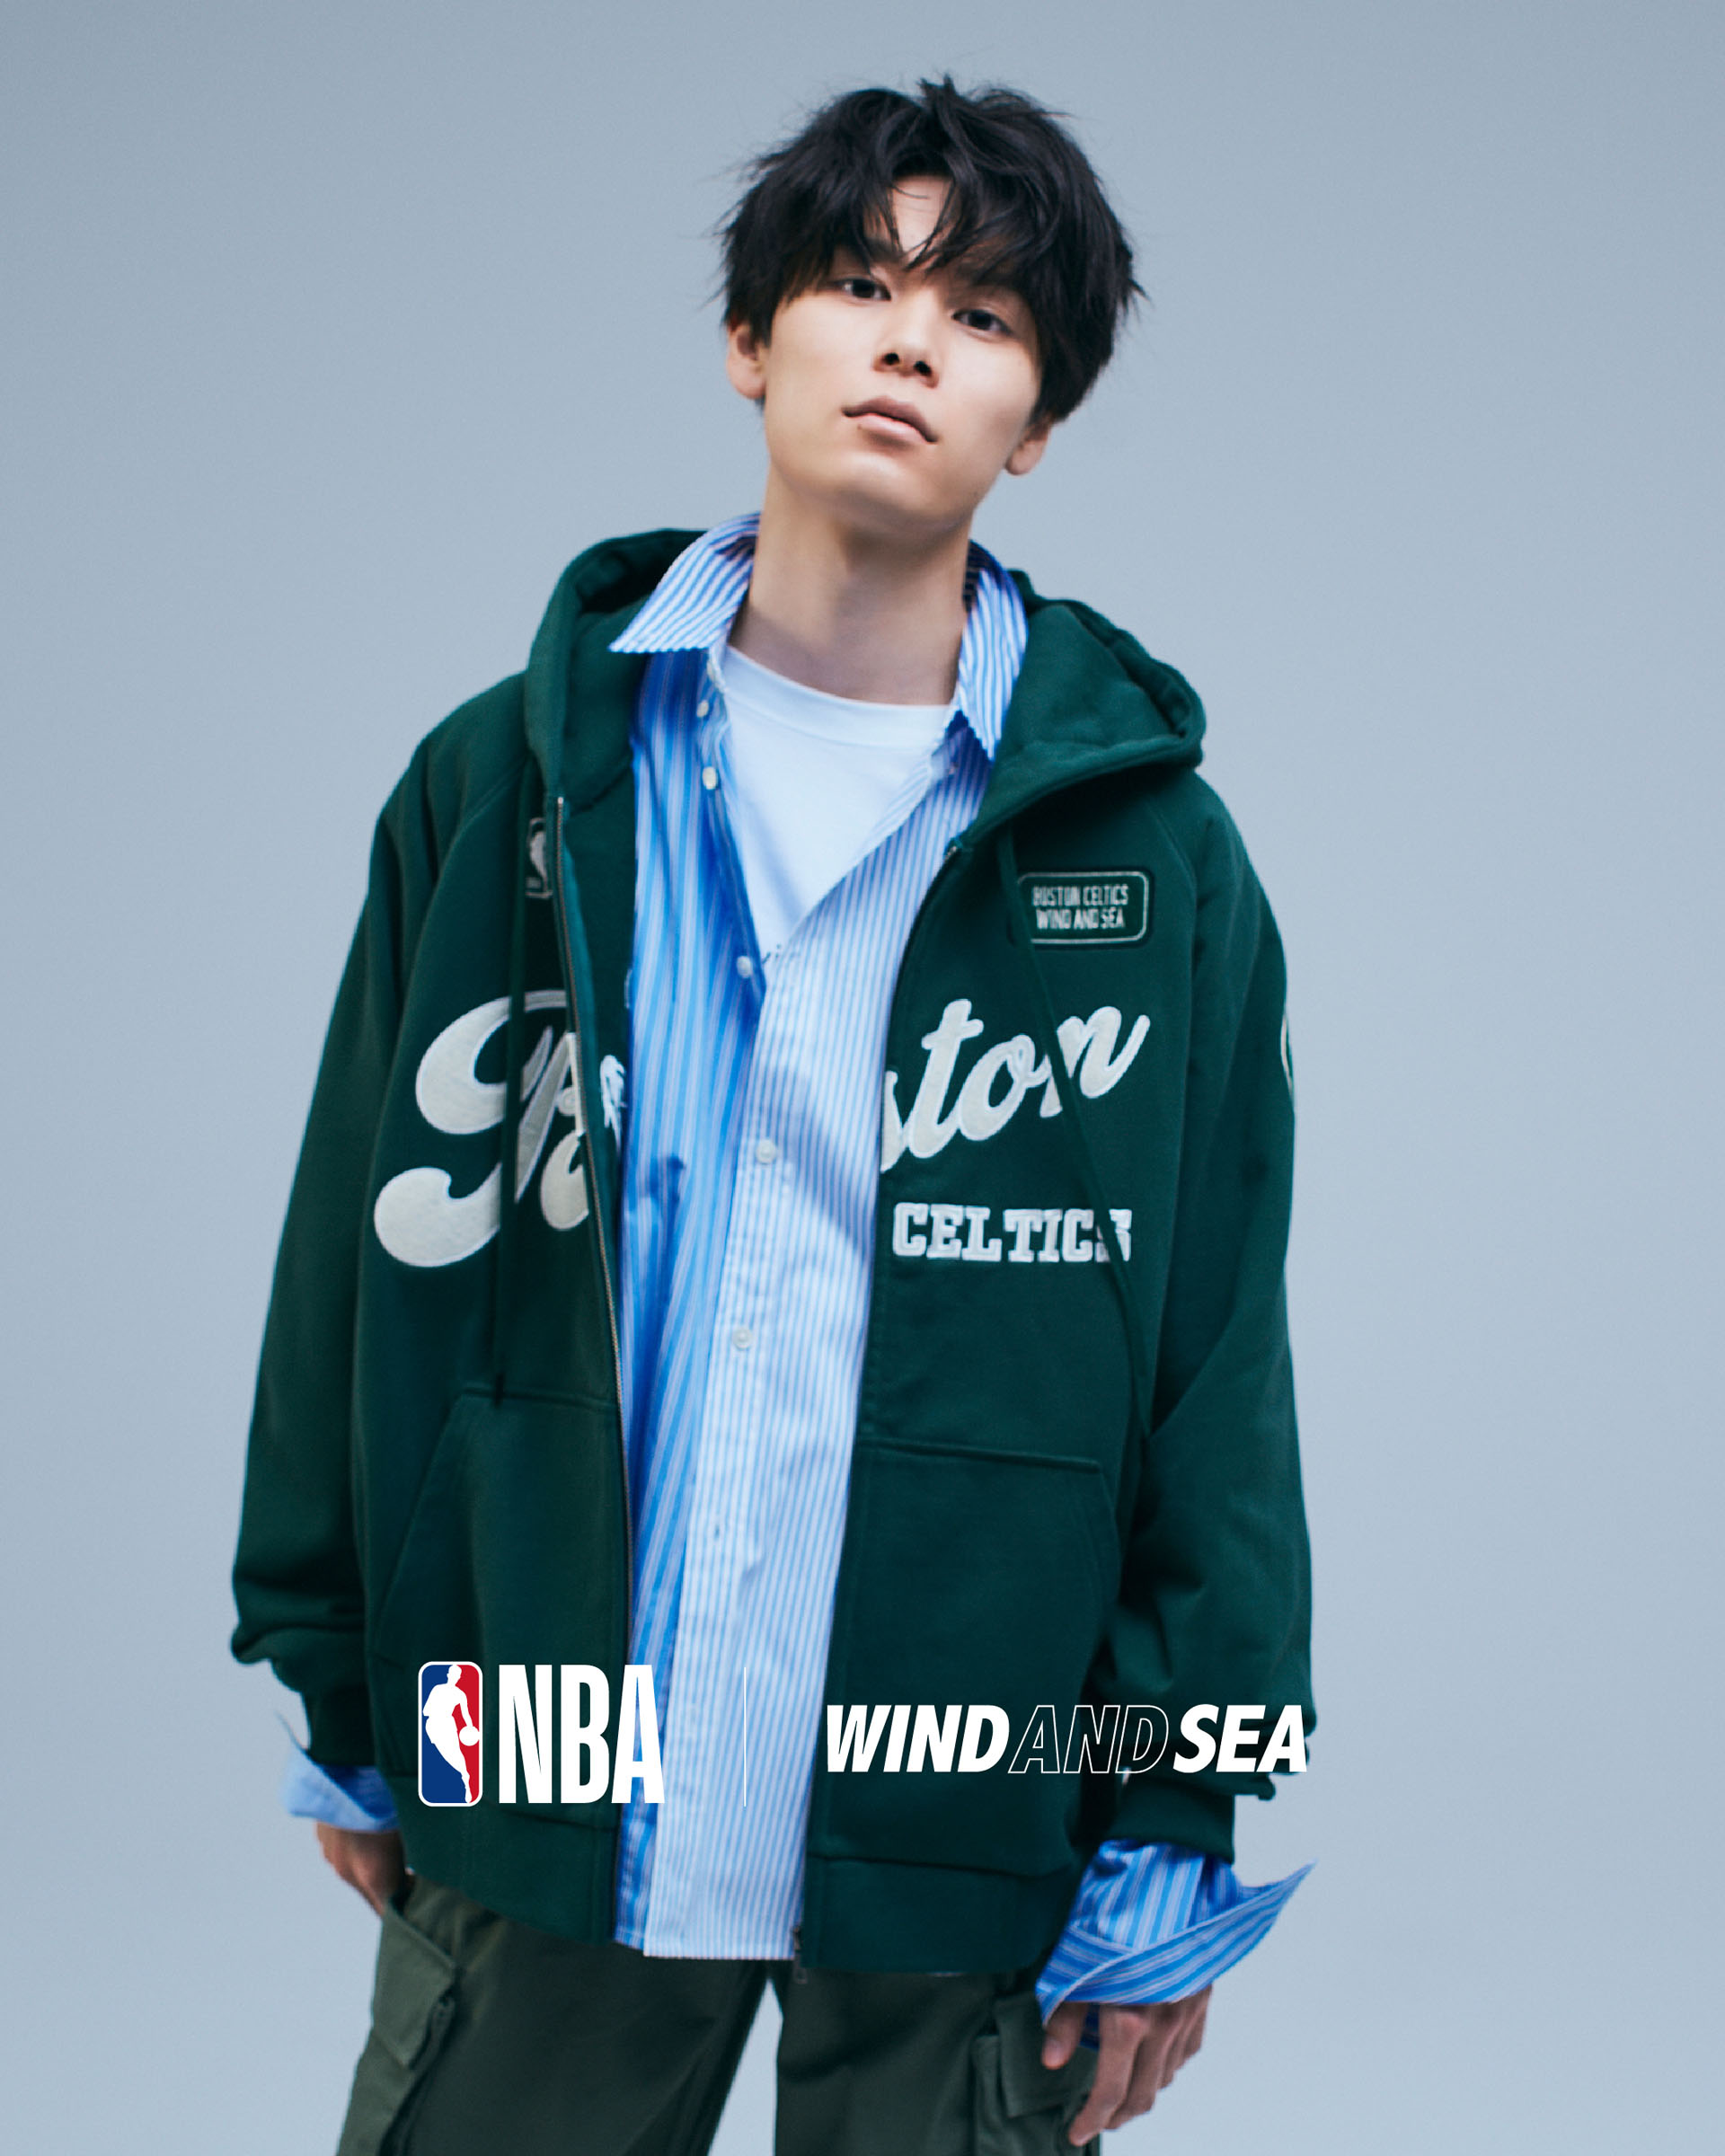 WIND AND SEAが「NBA PLAYOFFS LIMITED EDITIONカンファレンス